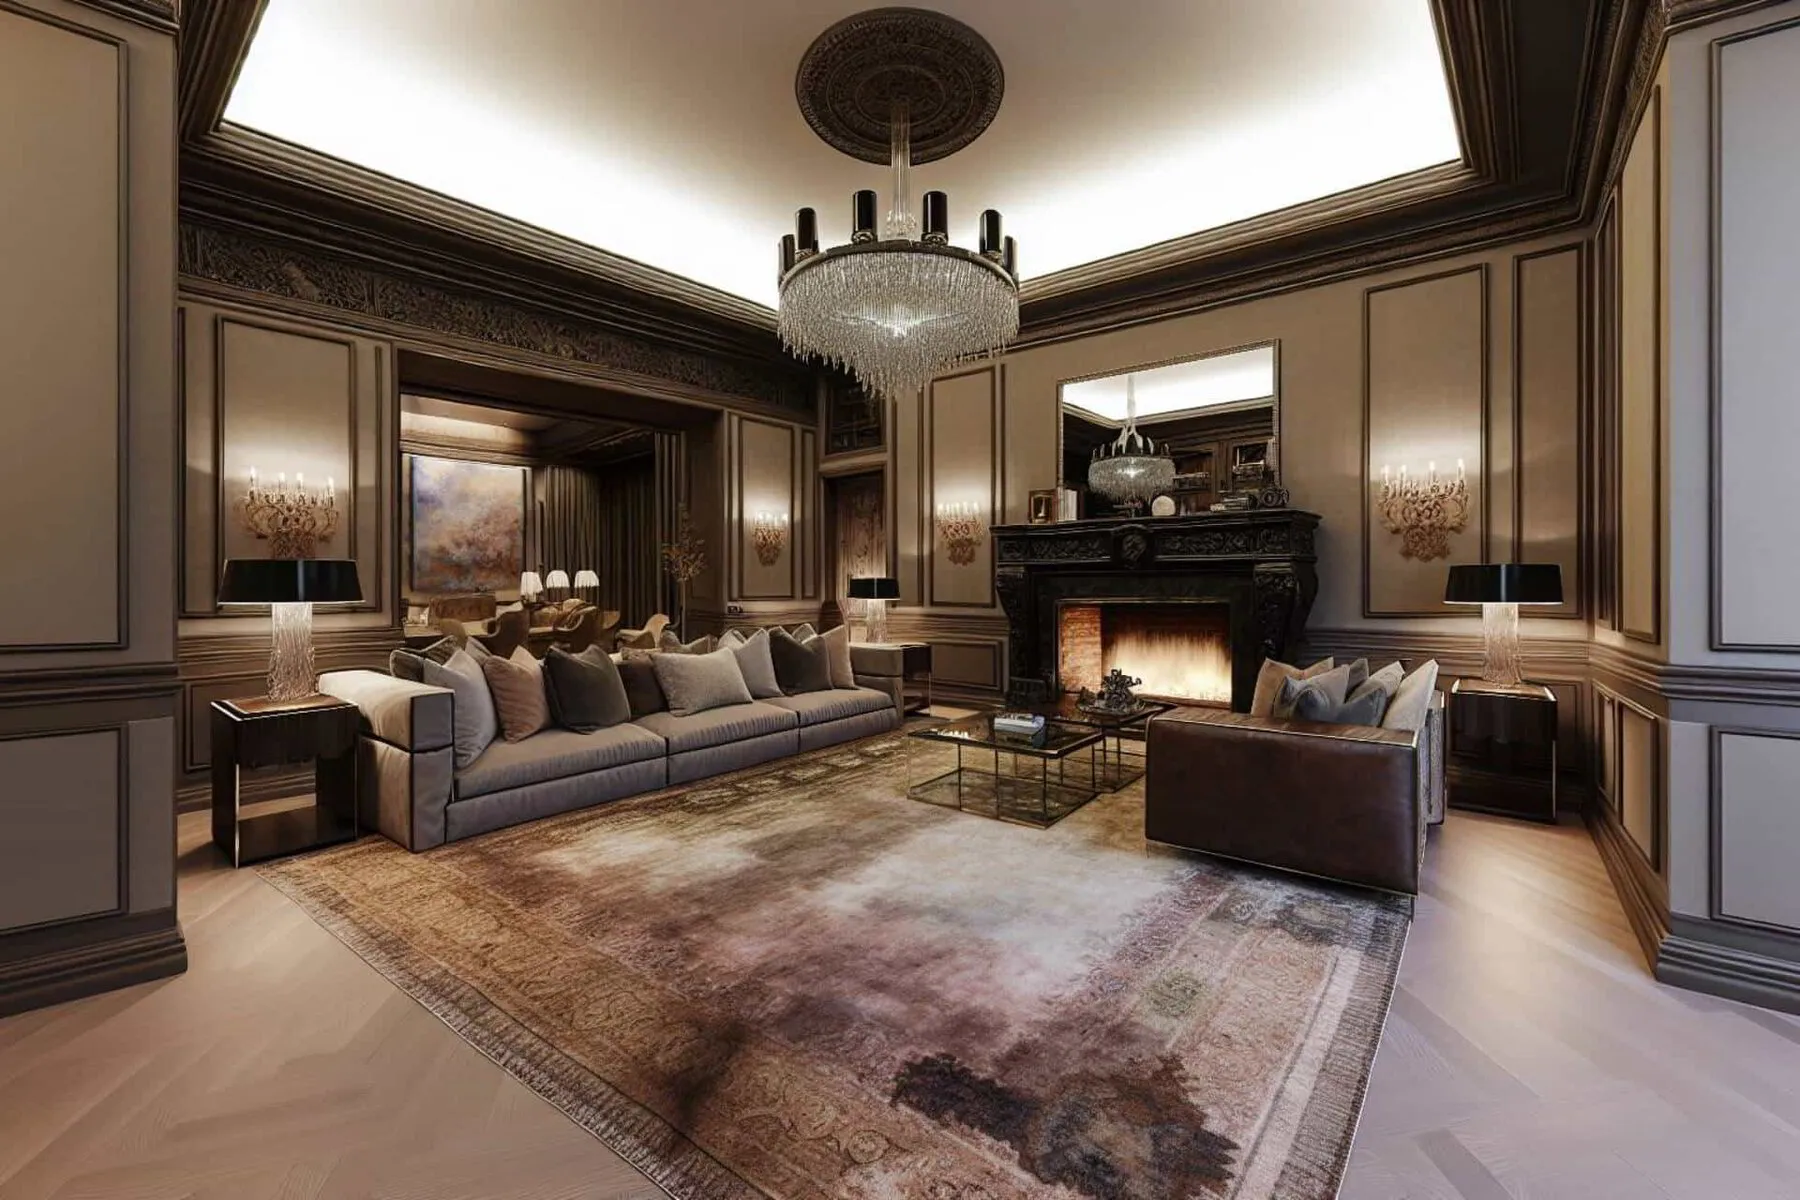 Luxurious living room with a stylish fireplace and high-quality materials